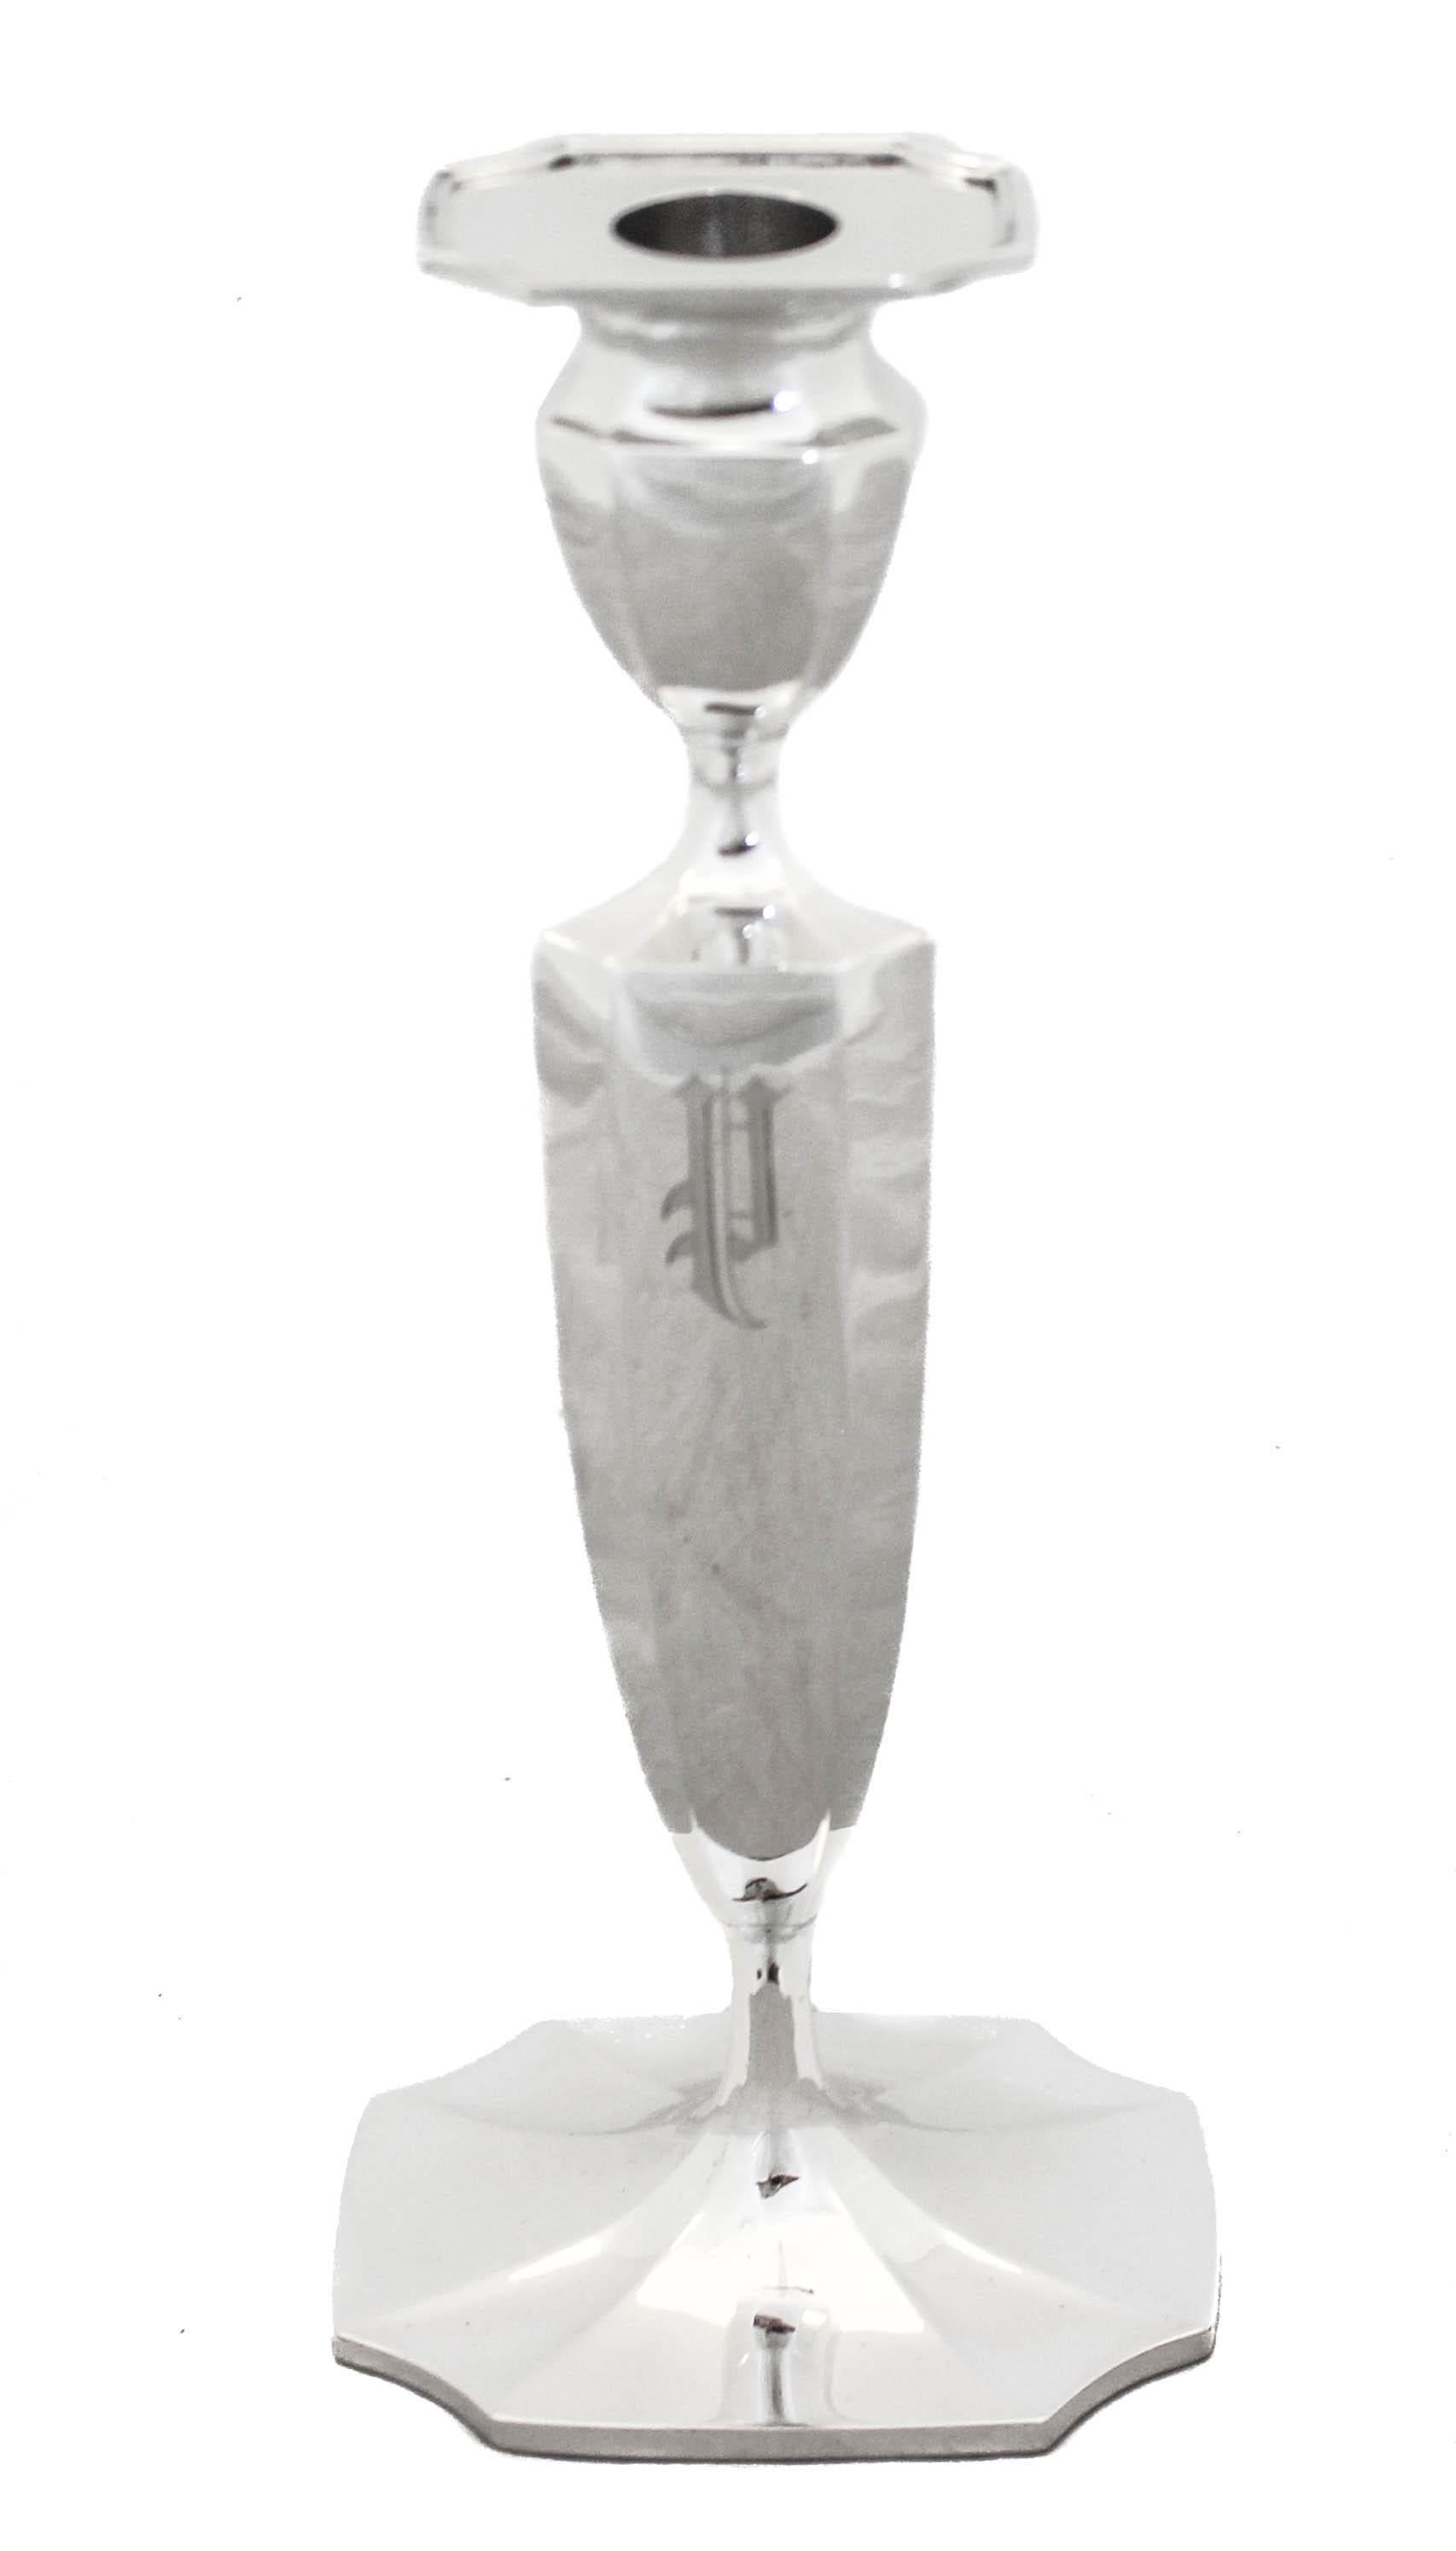 Being offered is a pair of sterling silver candlesticks by Reed and Barton. These candlesticks are very handsome and have a paneled body with a matching base and bobeche. A tapered shape and straight lines make for an elegant and sophisticated look.